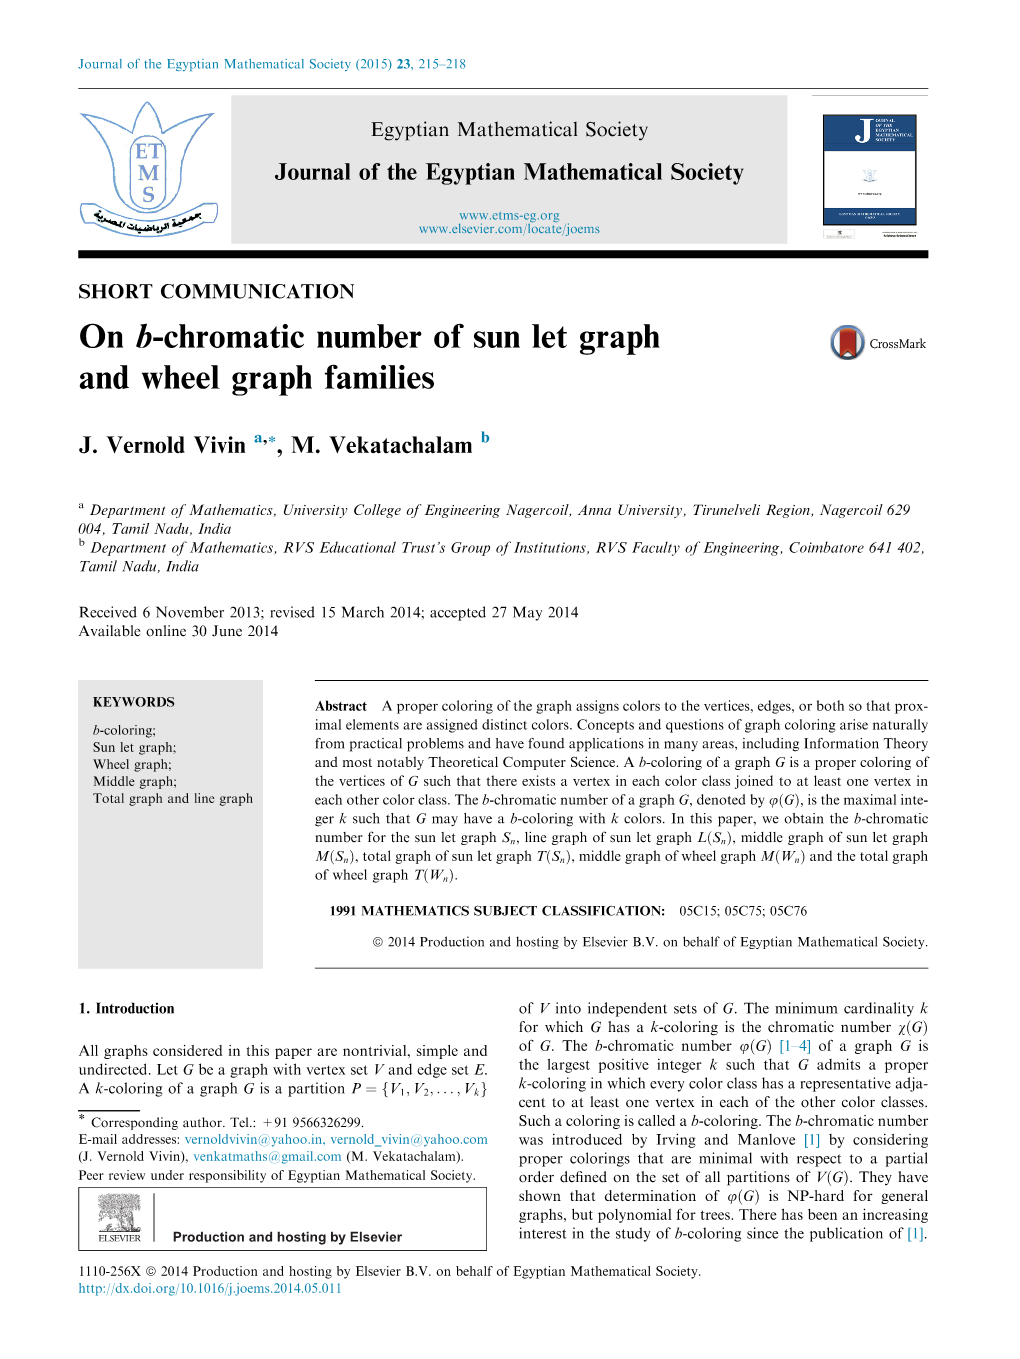 On B-Chromatic Number of Sun Let Graph and Wheel Graph Families